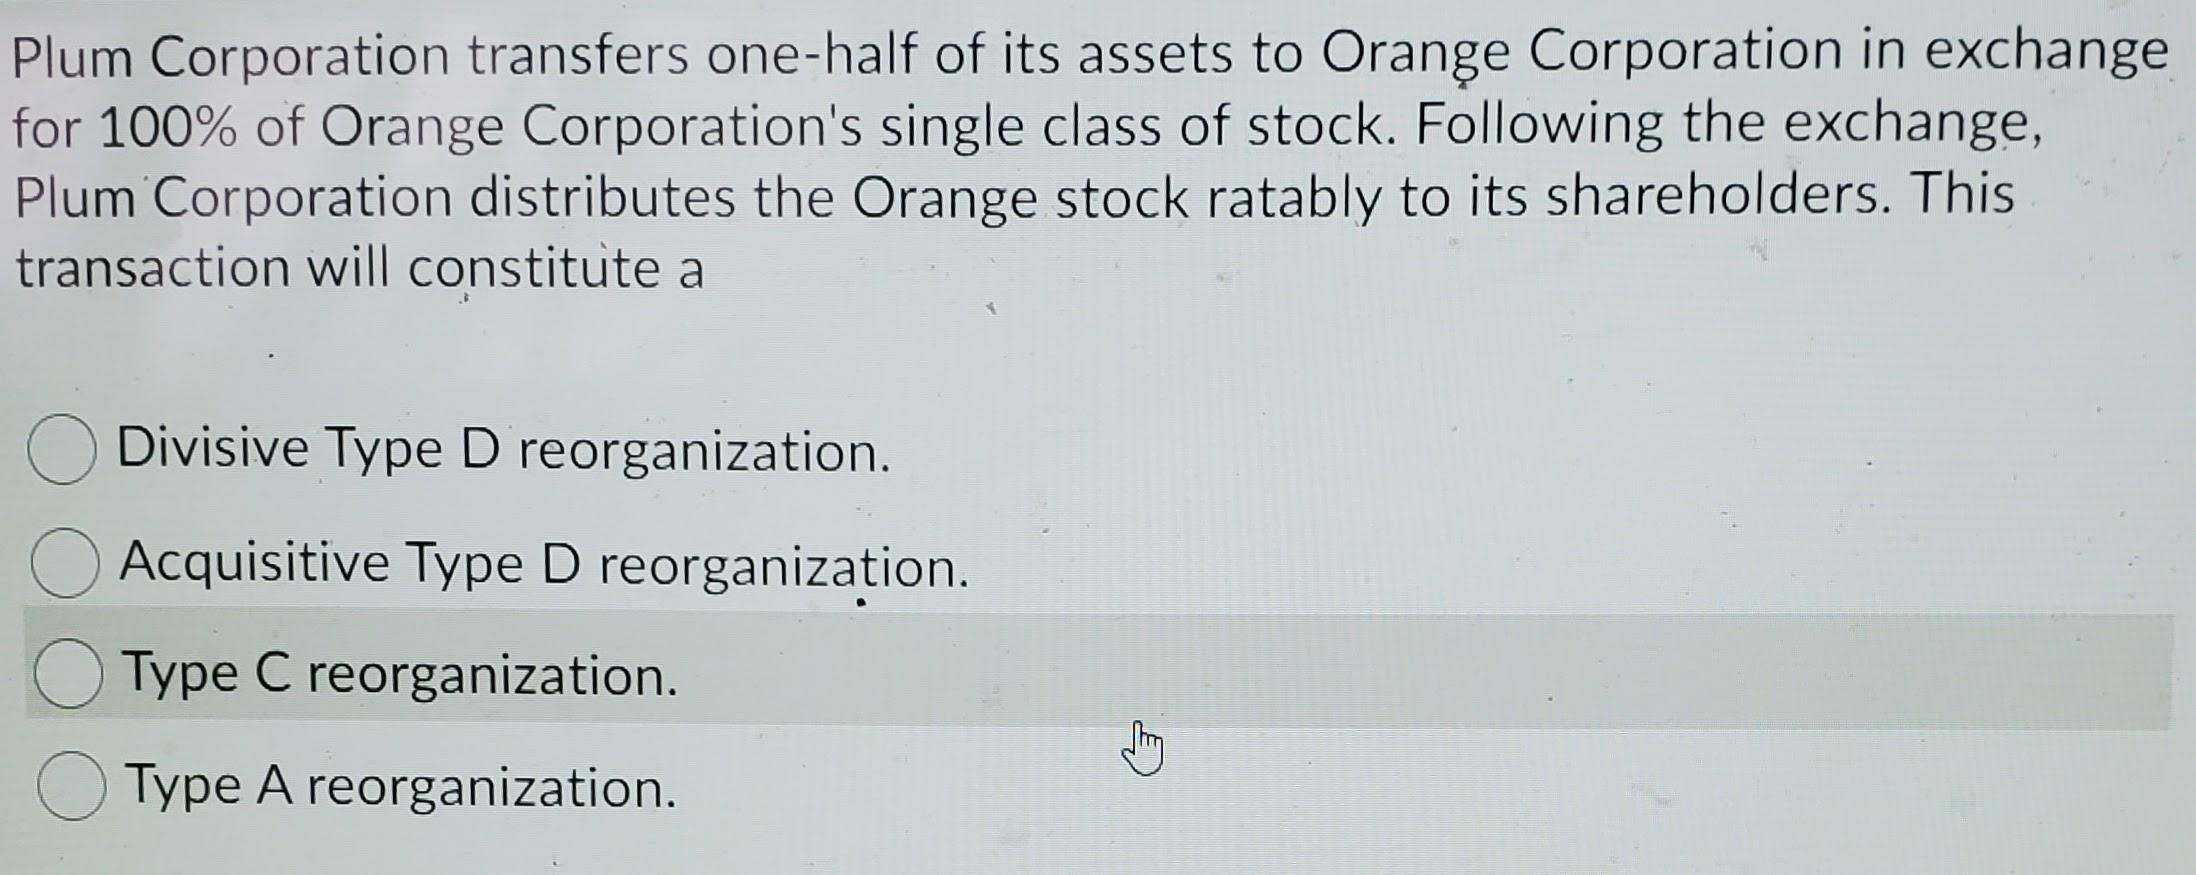 Plum Corporation transfers one-half of its assets to Orange Corporation in exchangefor 100% of Orange Corporations single c